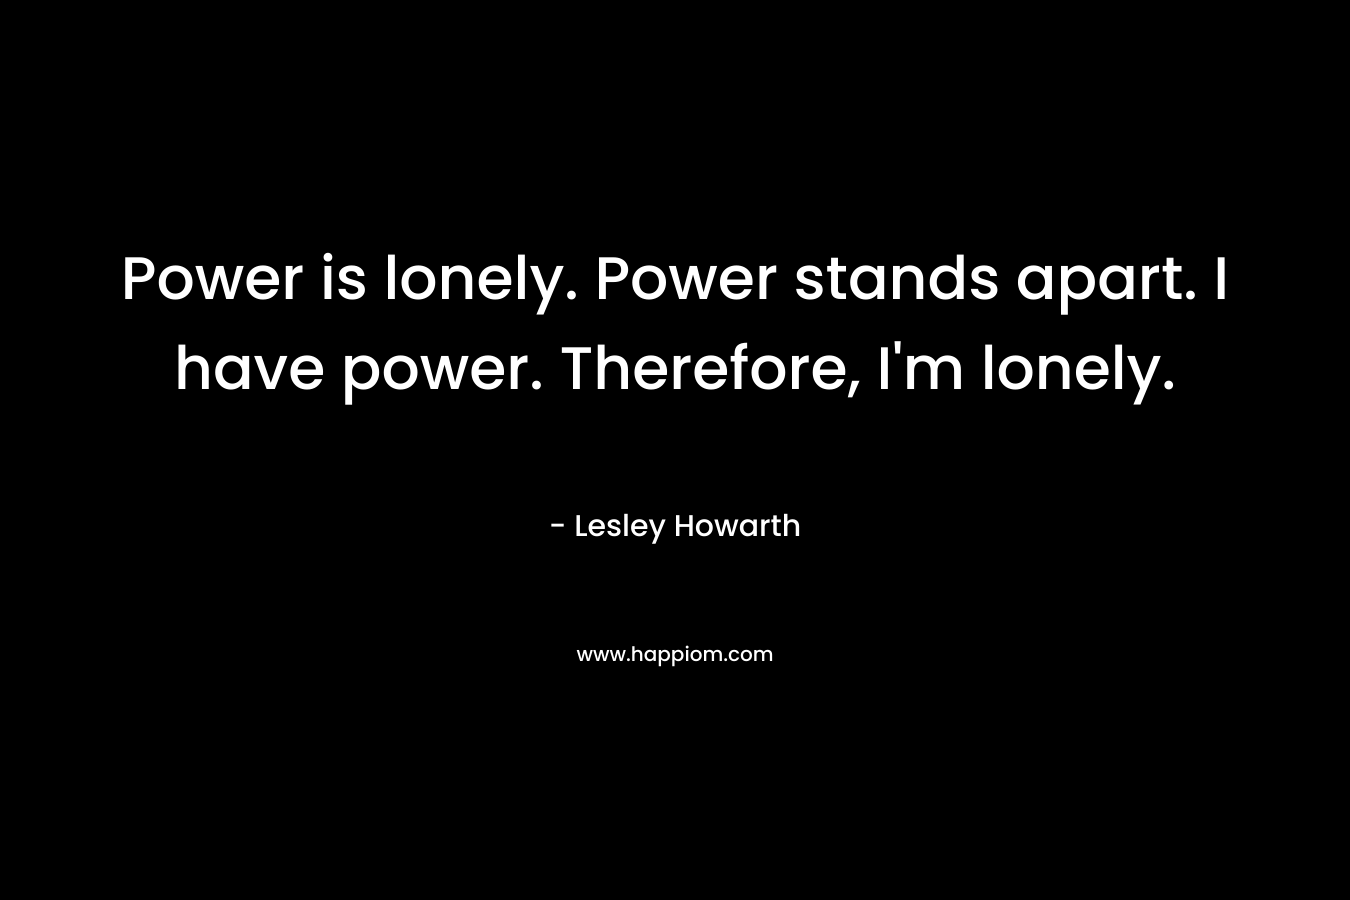 Power is lonely. Power stands apart. I have power. Therefore, I'm lonely.